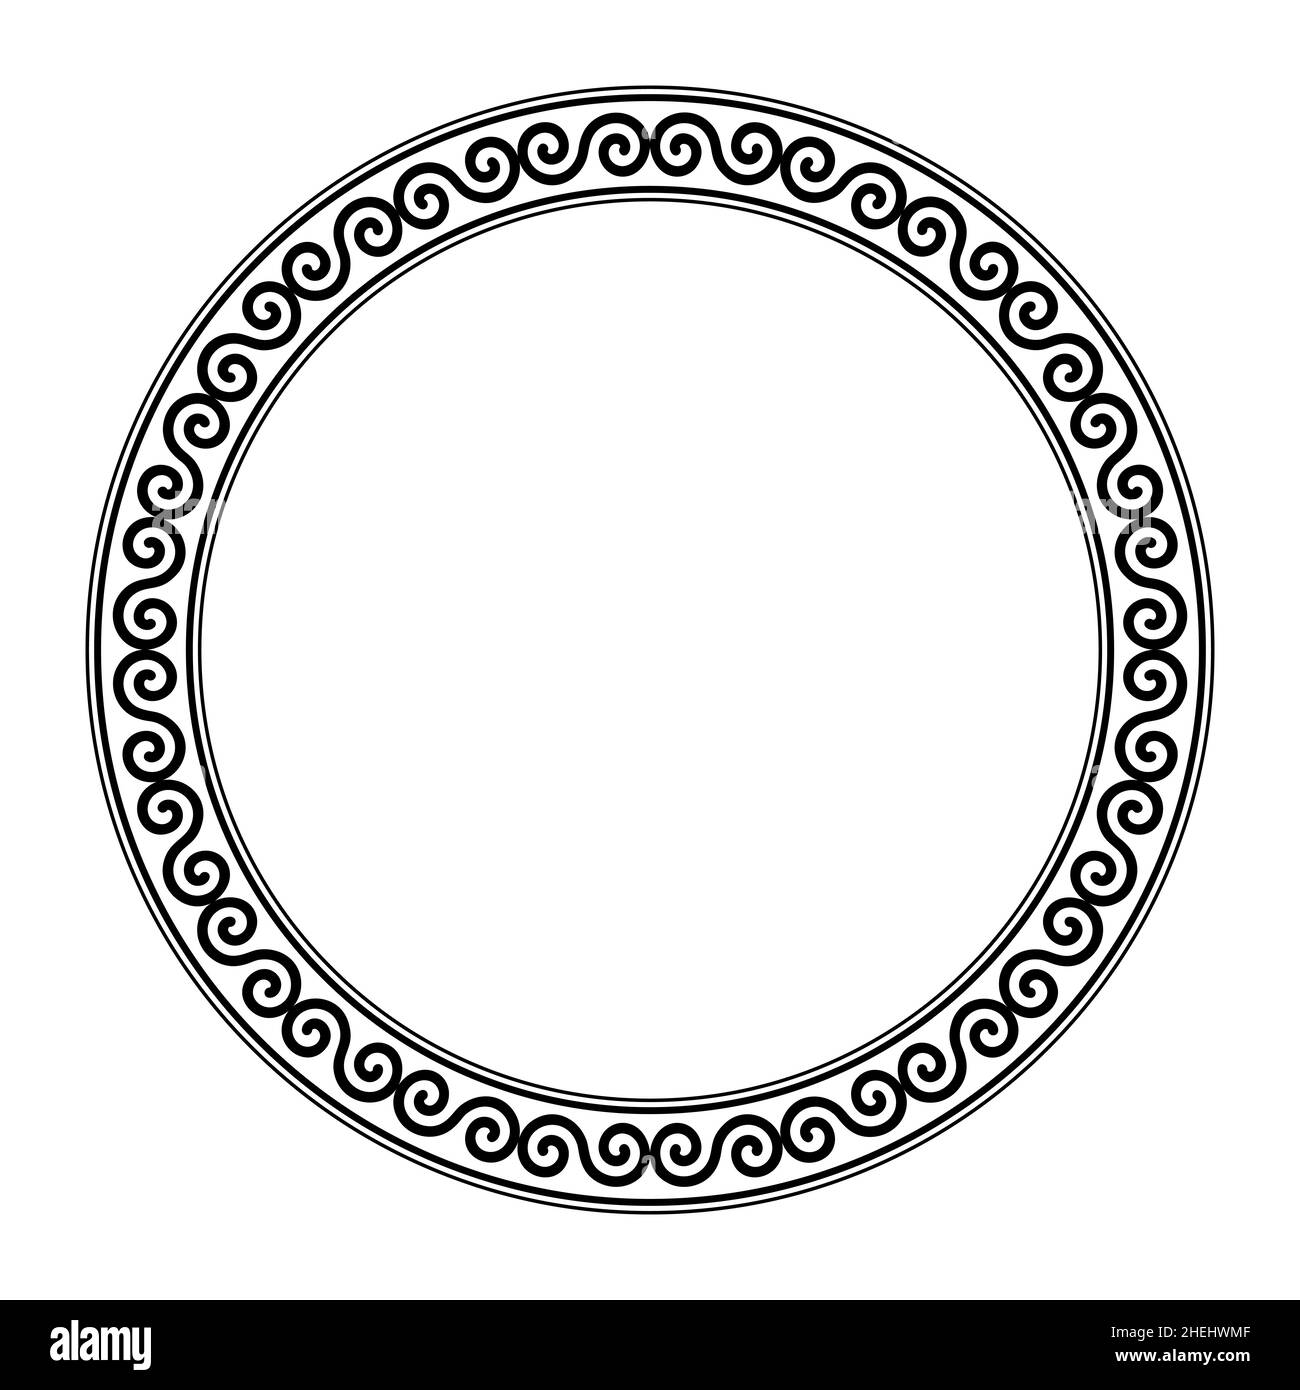 Circle frame, with meander made of a Celtic double spiral pattern. Decorative round border, made of alternate flipped double spirals. Stock Photo